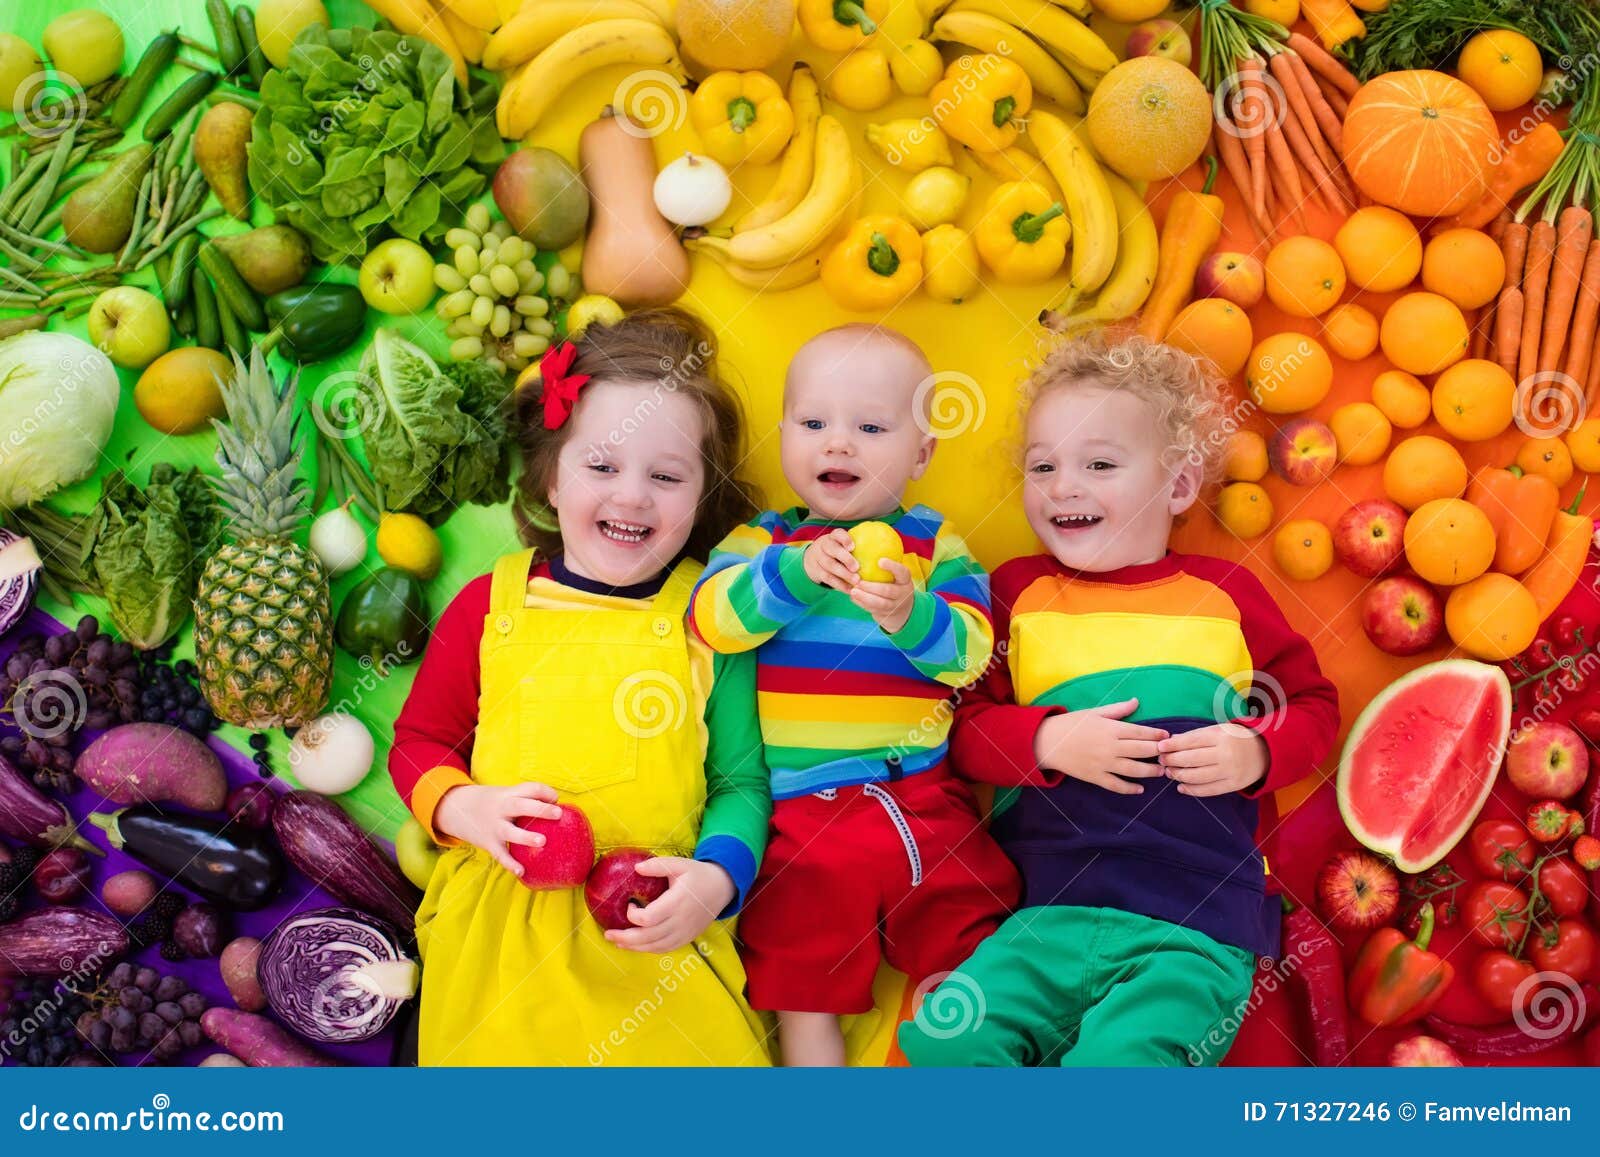 Healthy Fruit and Vegetable Nutrition for Kids Stock Photo - Image ...